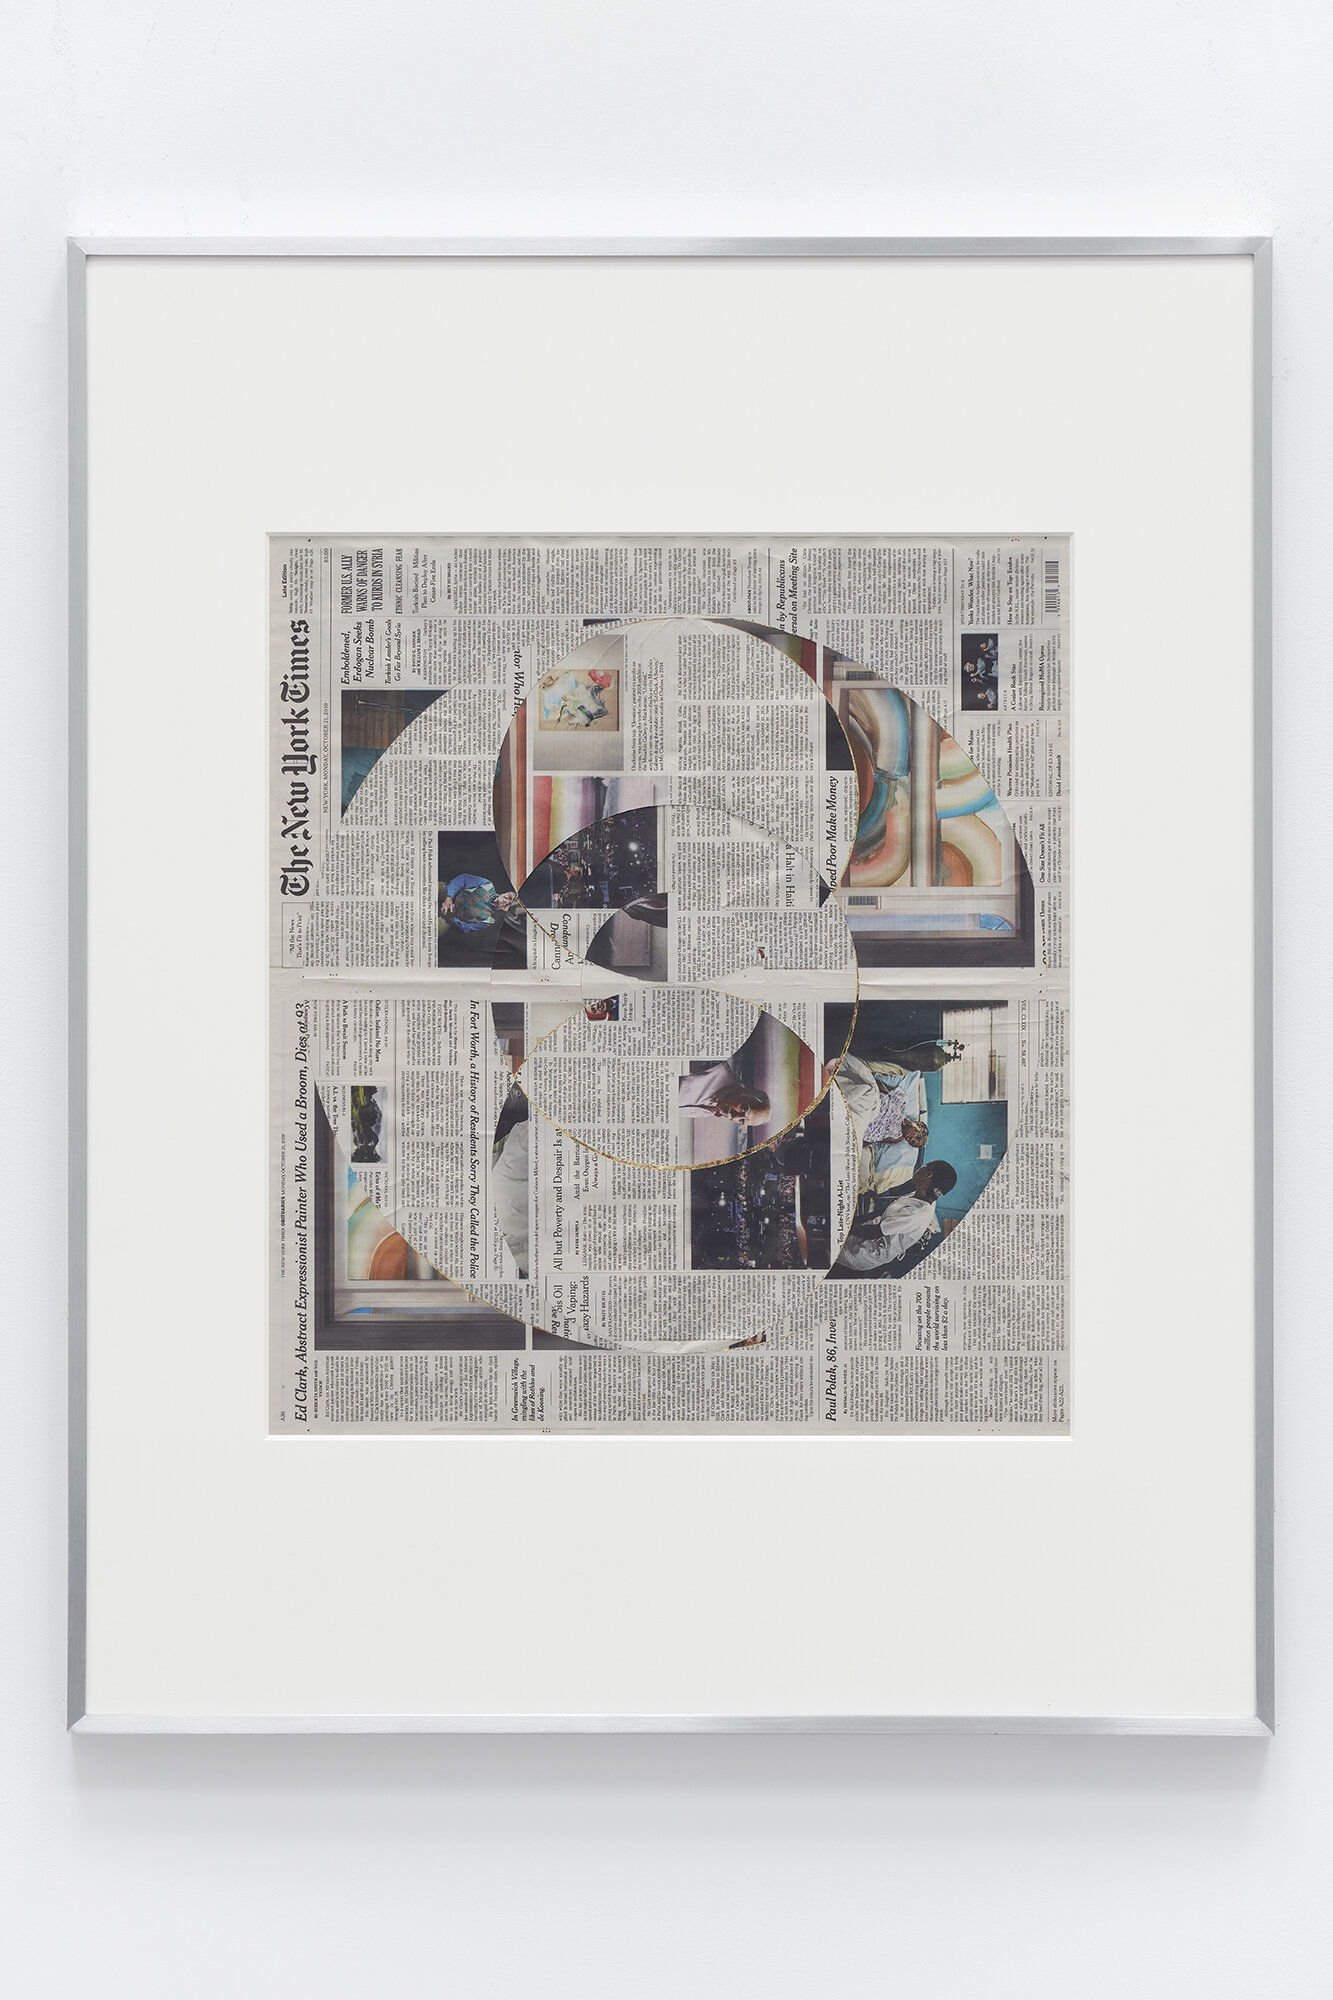   Blind Collage (Three 180º Rotations, The New York Times, Monday, October 21, 2019)    2019   Newspaper, tape, and 22 karat gold leaf  39 1/8 x 31 1/4 inches   Blind Collages, 2017–  